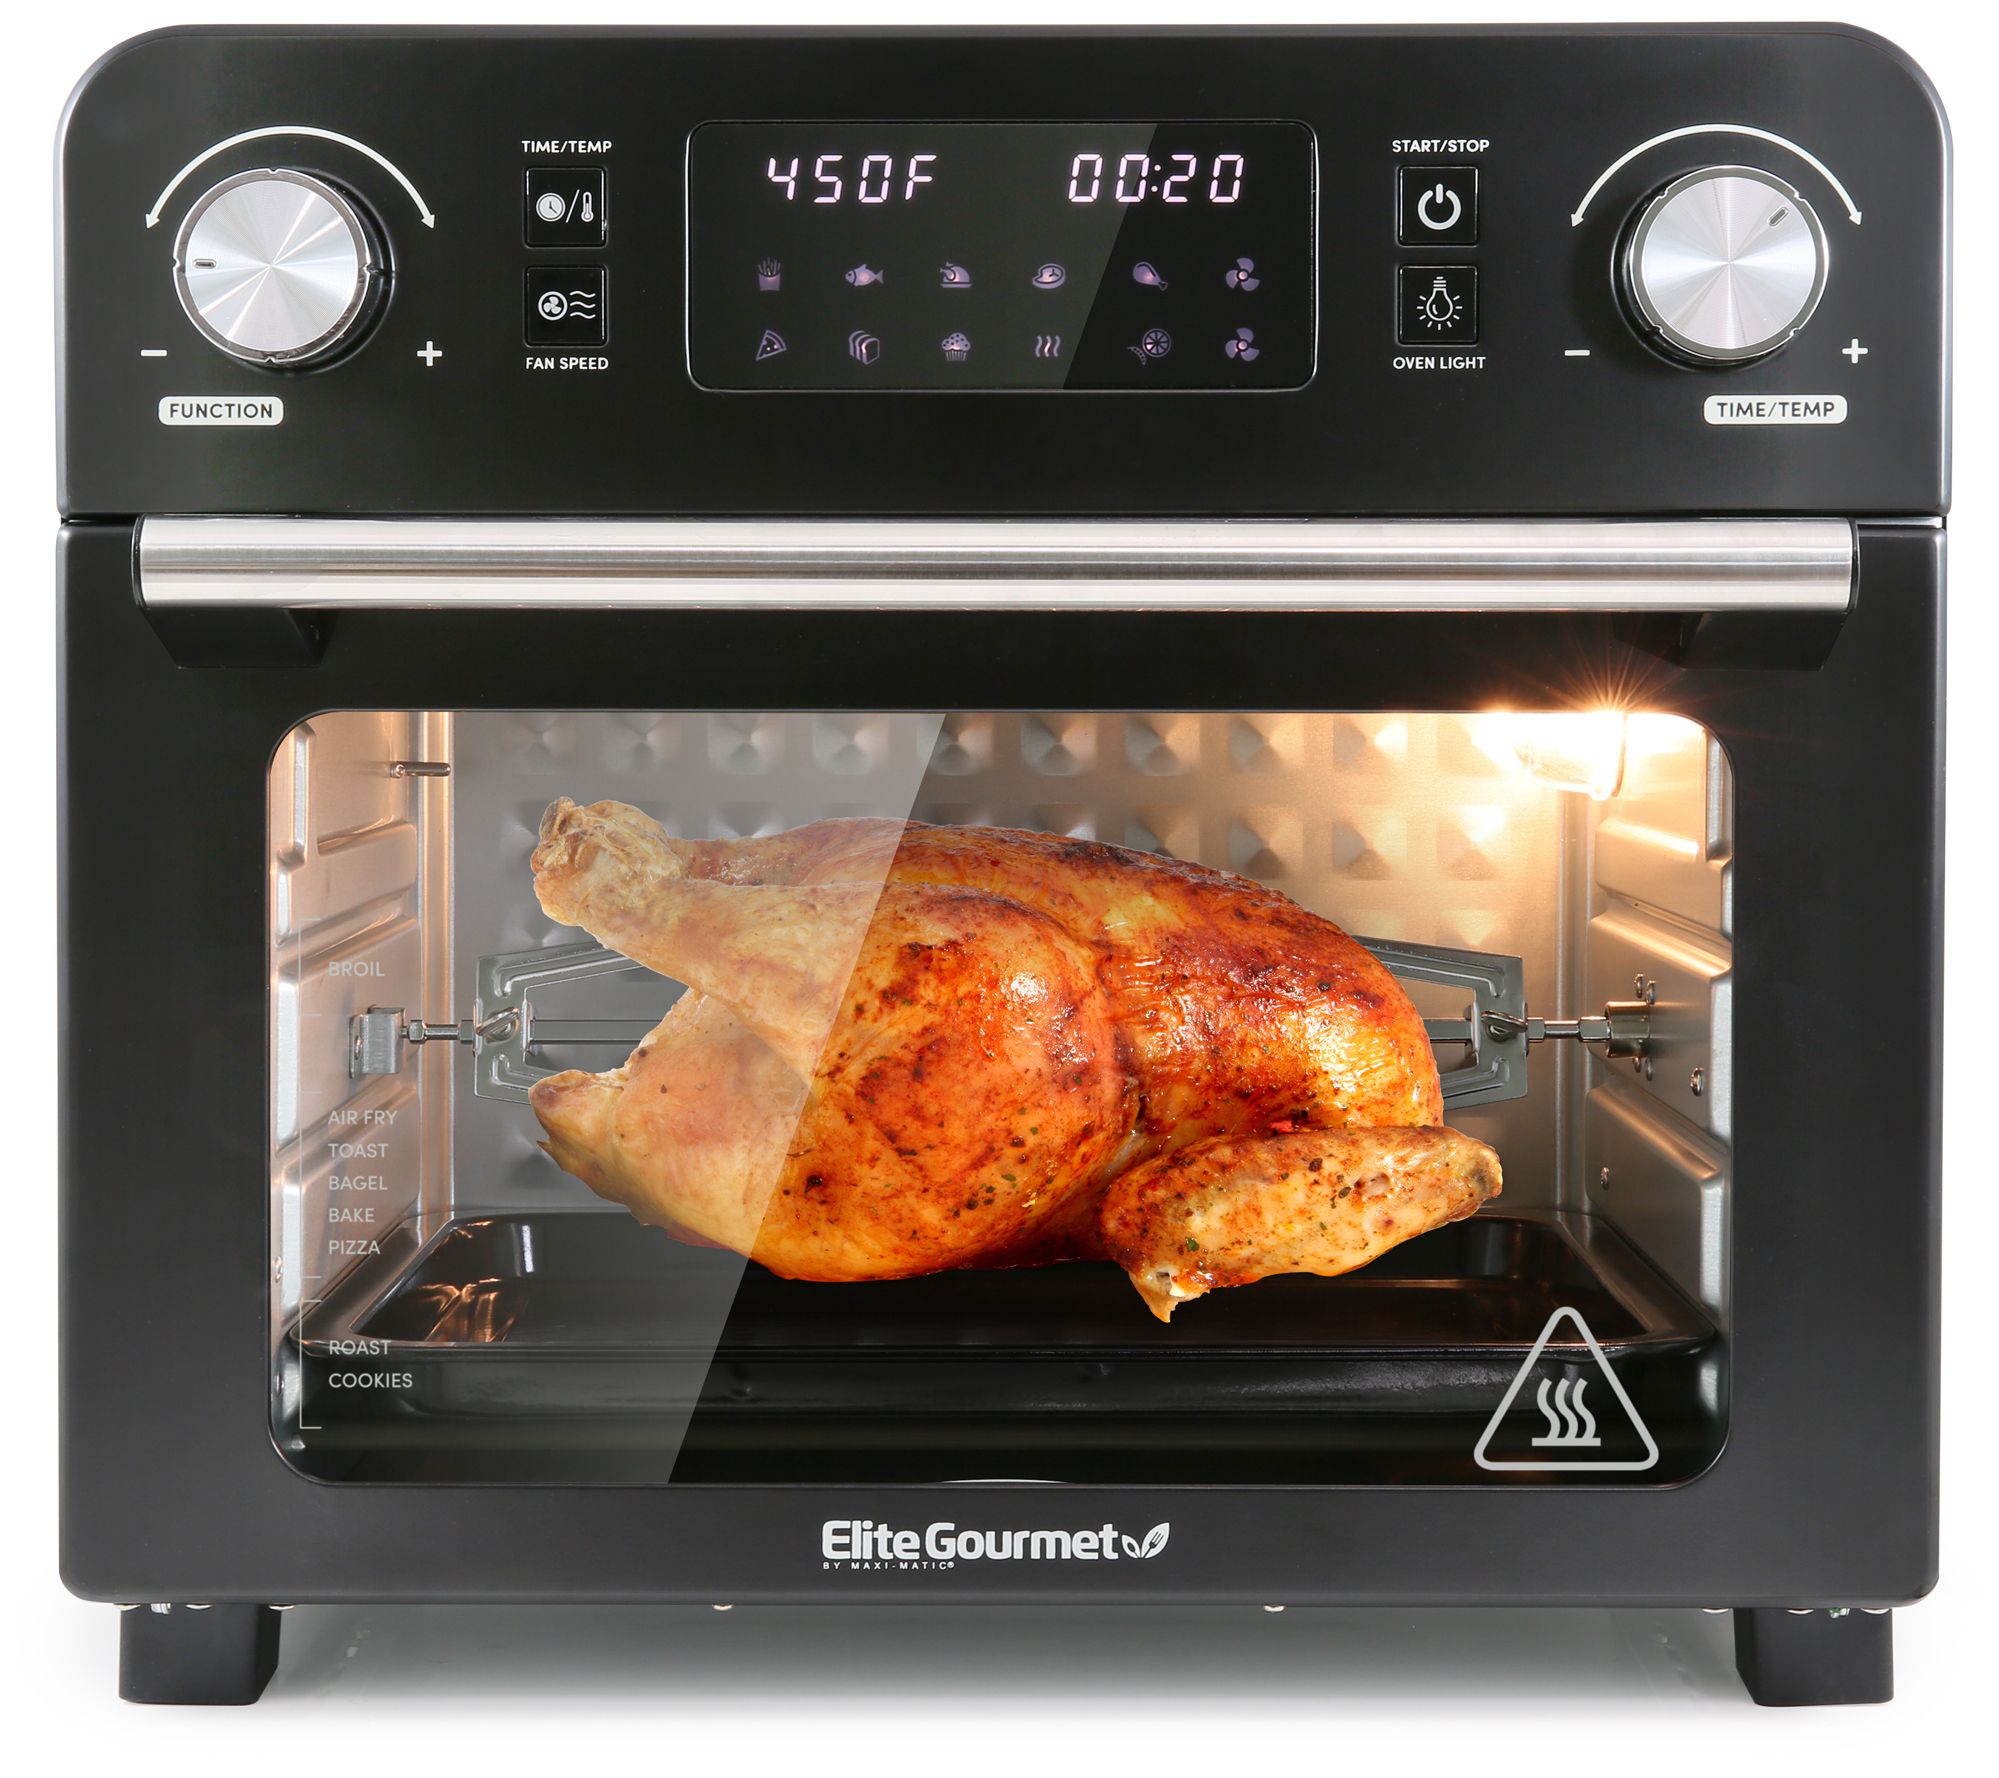 Elite Gourmet Maxi-Matic Programmable Review